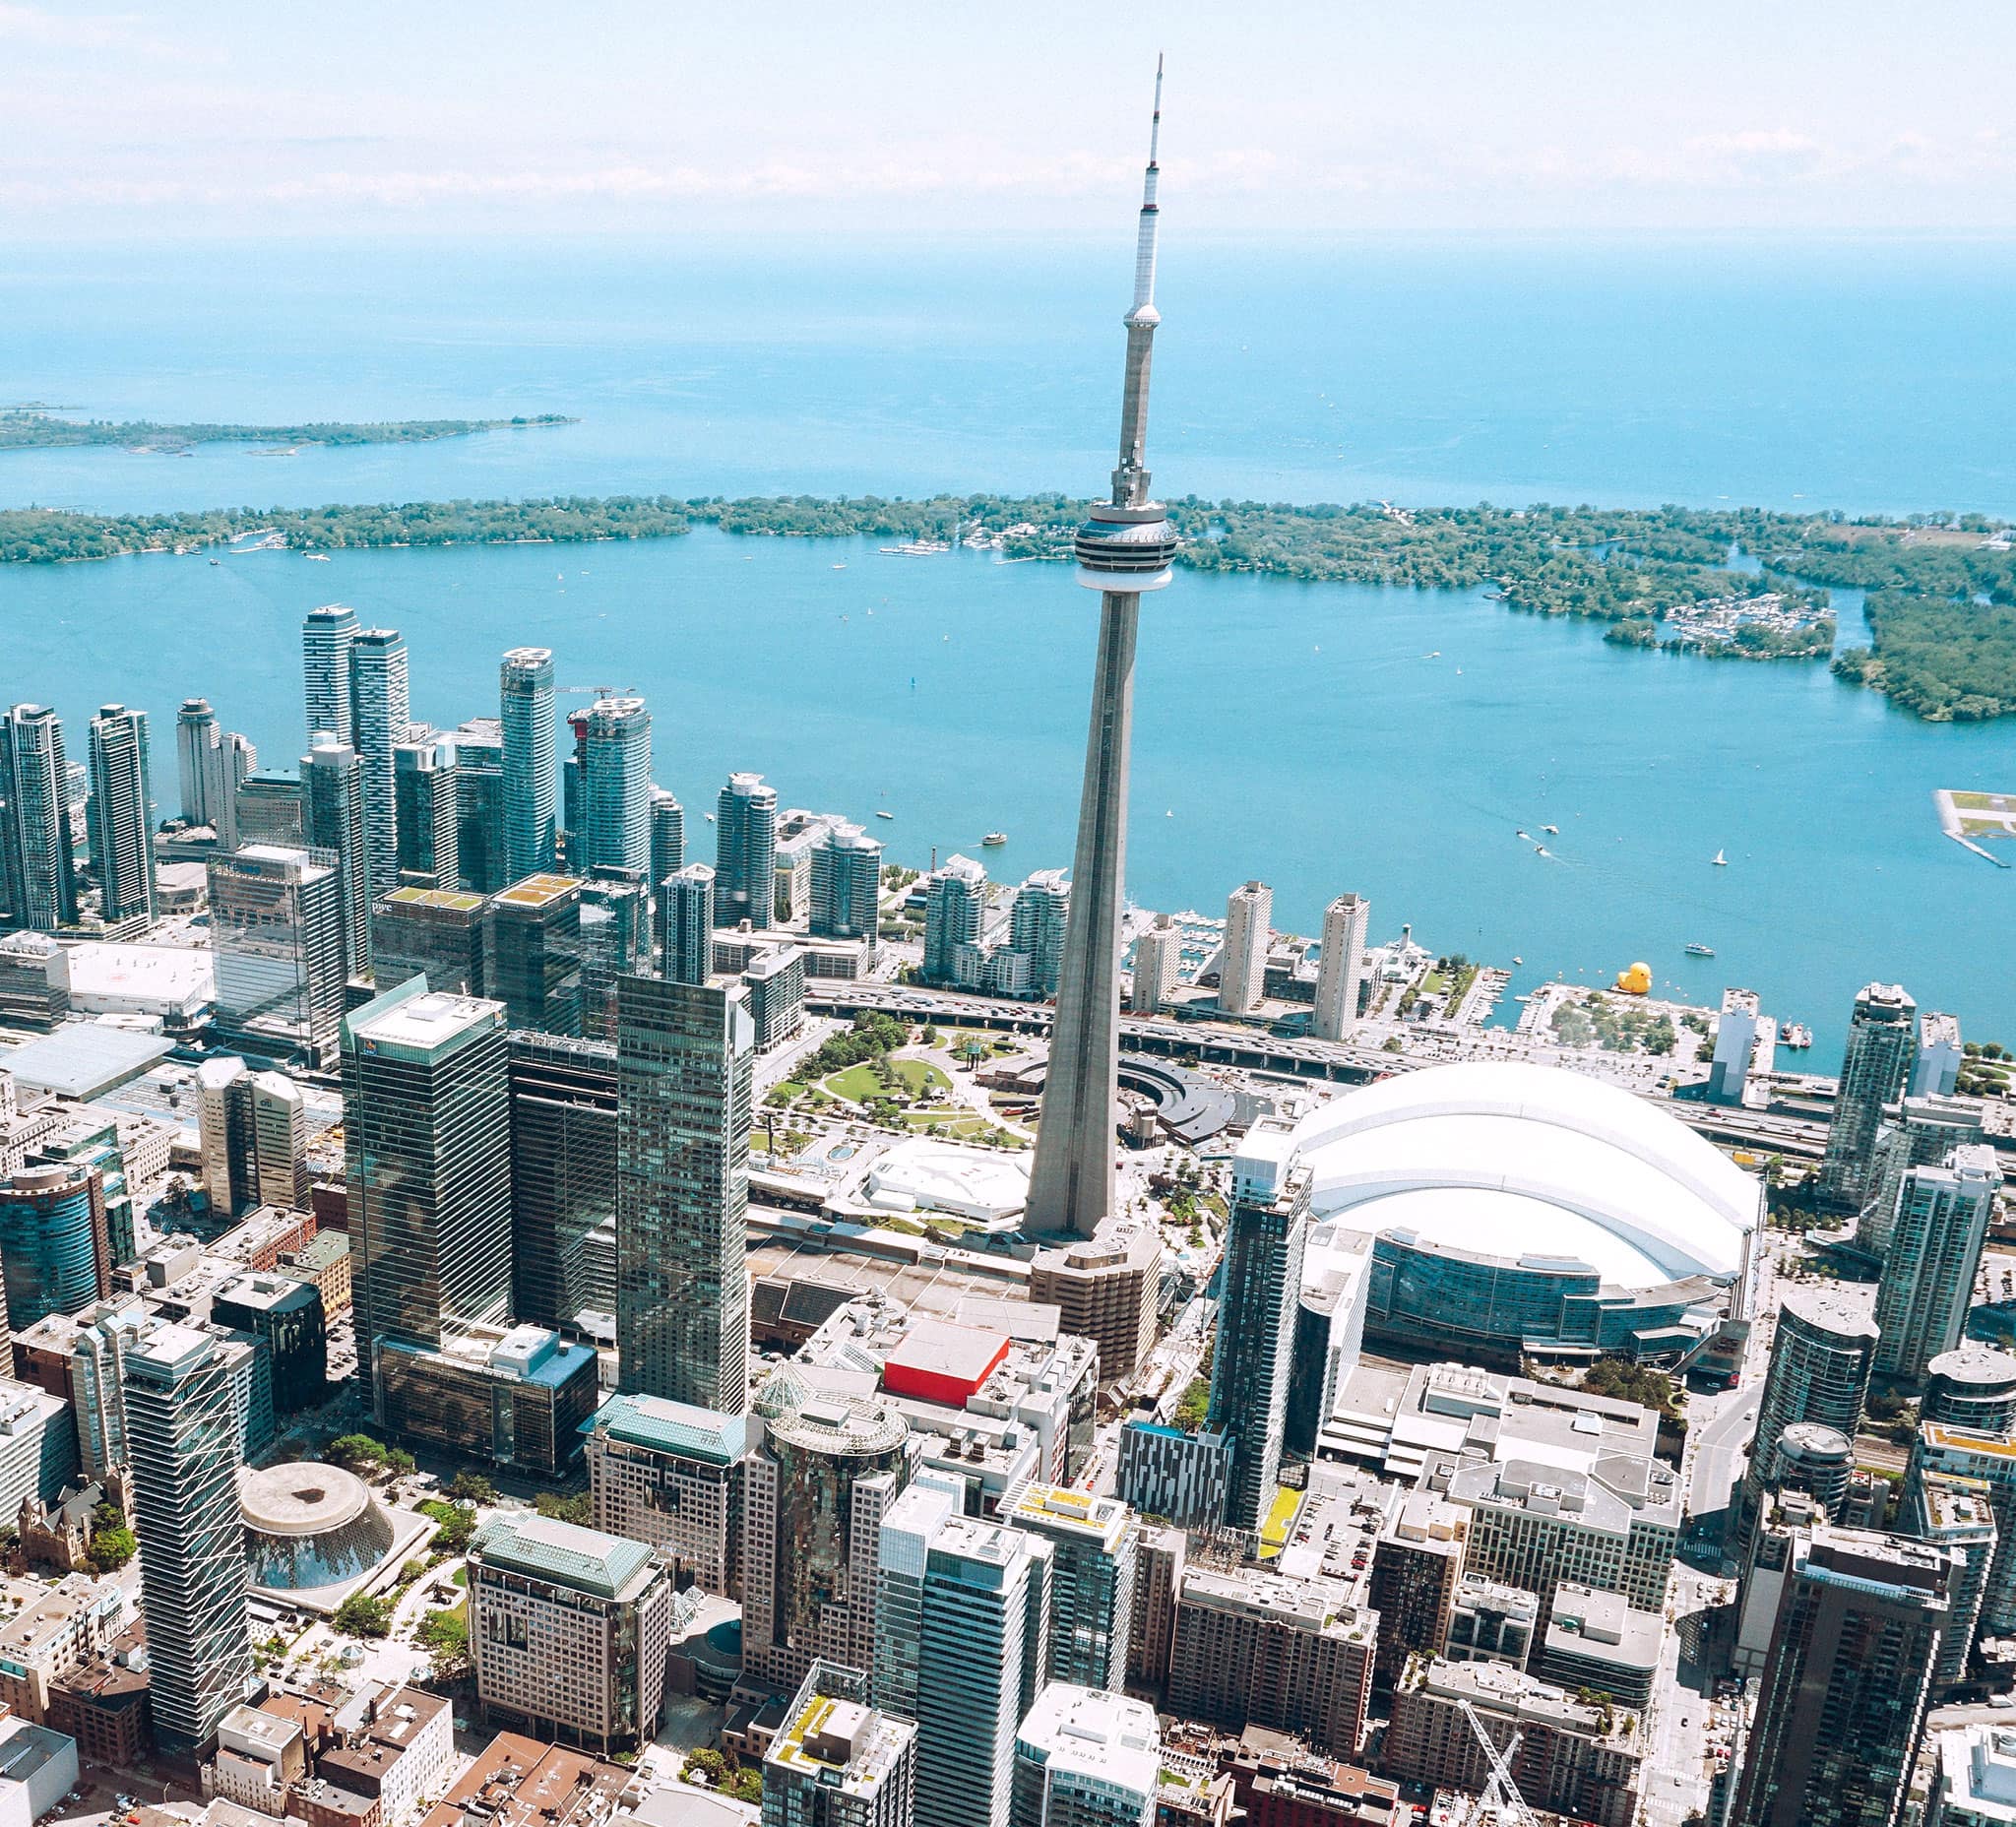 An aerial view of downtown Toronto on a sunny day, showing the CN Tower, Rogers Centre, the harbour and the Toronto islands.